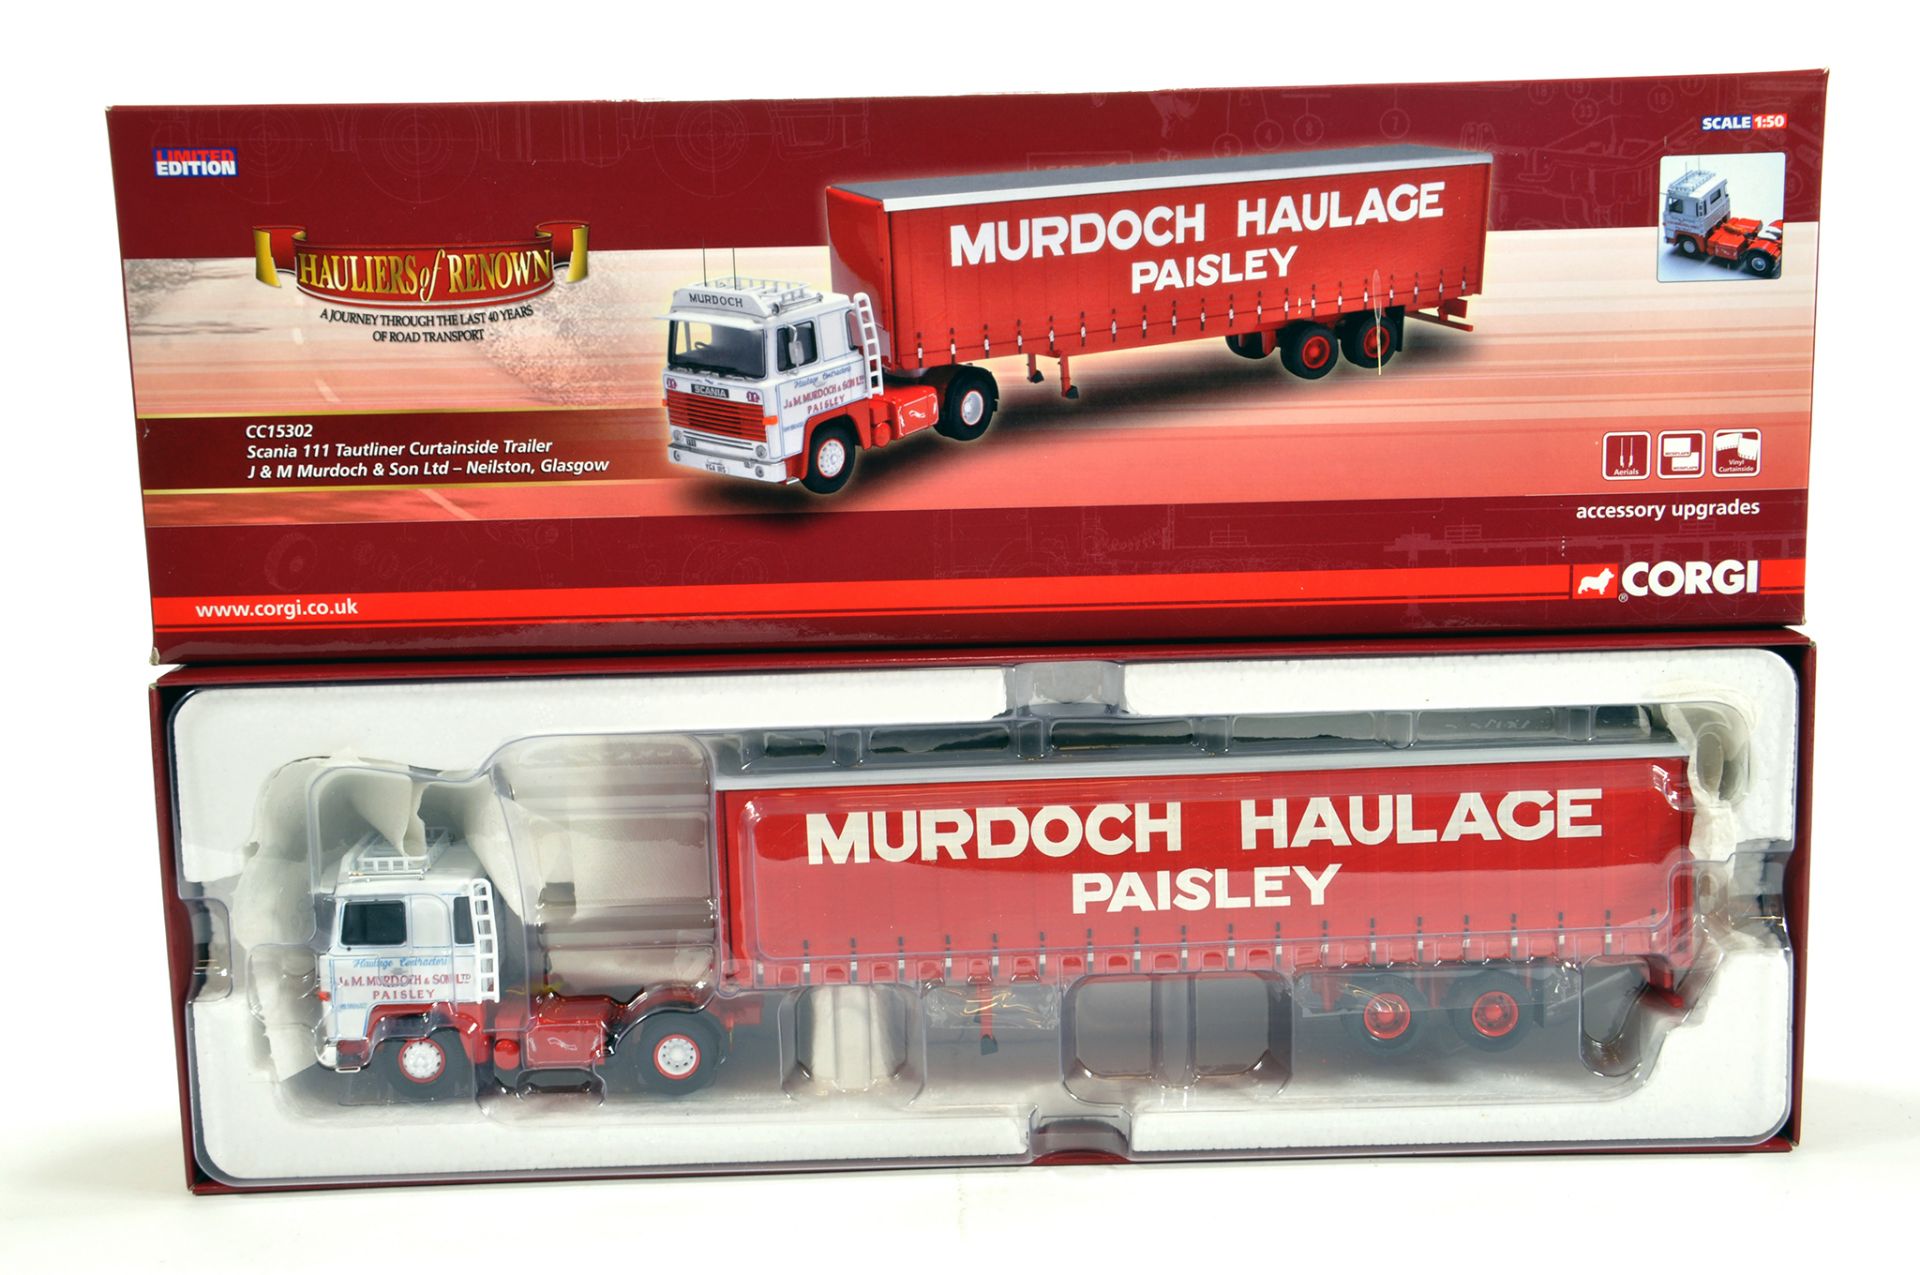 Corgi 1/50 Diecast Truck Issue Comprising No. CC15302 Scania 111 Curtainside in livery of J&M